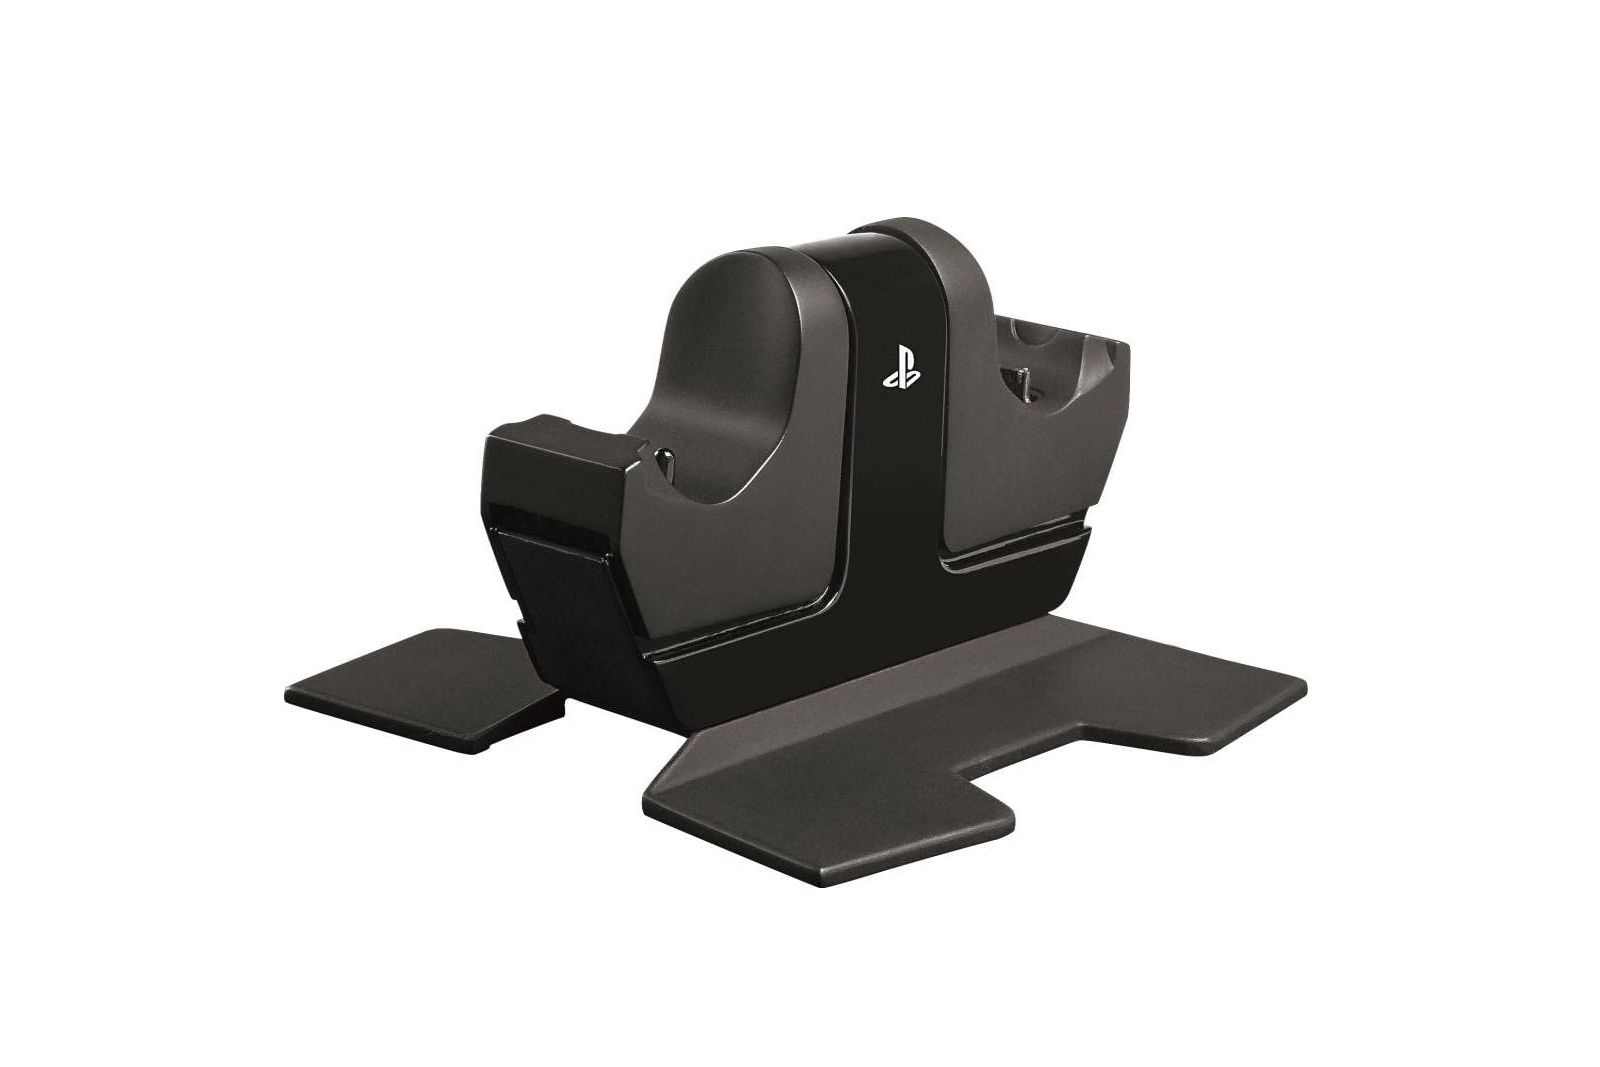 Best PS4 accessories 2020: Get the best add-ons for your PlayStation 4 photo 1